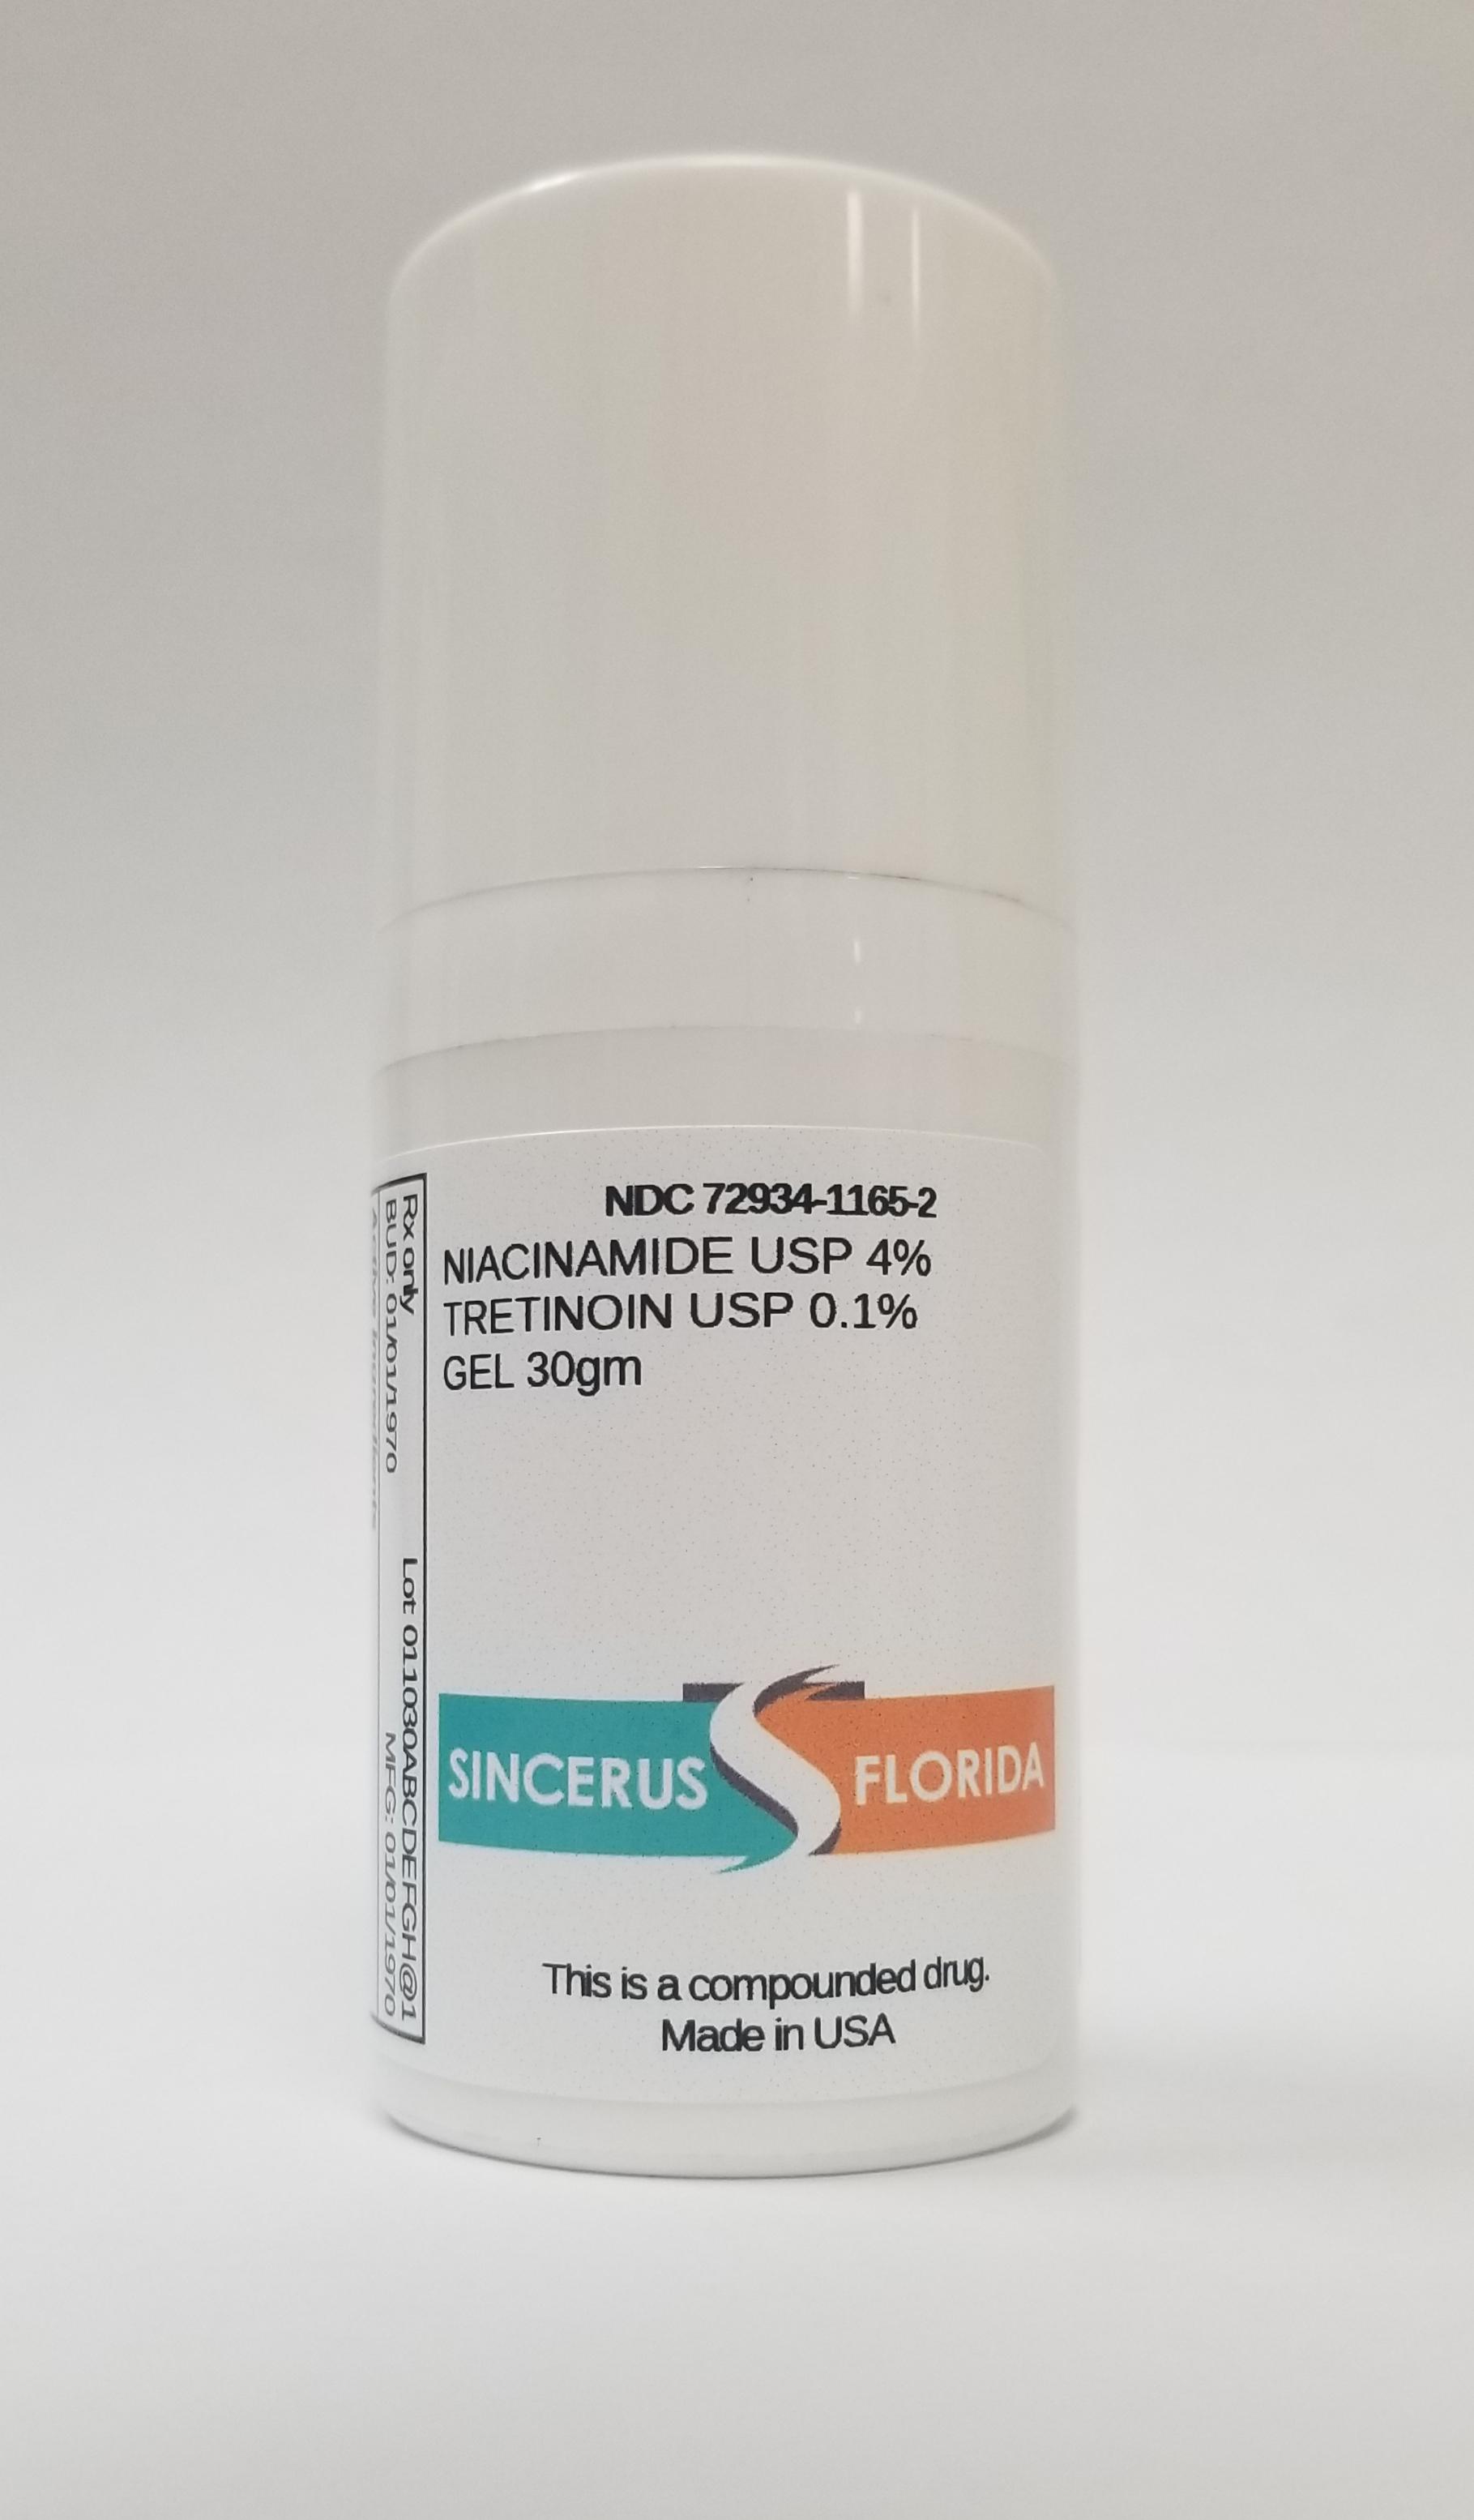 Gel 30gm  Sincerus Florida  This is a compounded drug  Made in USA